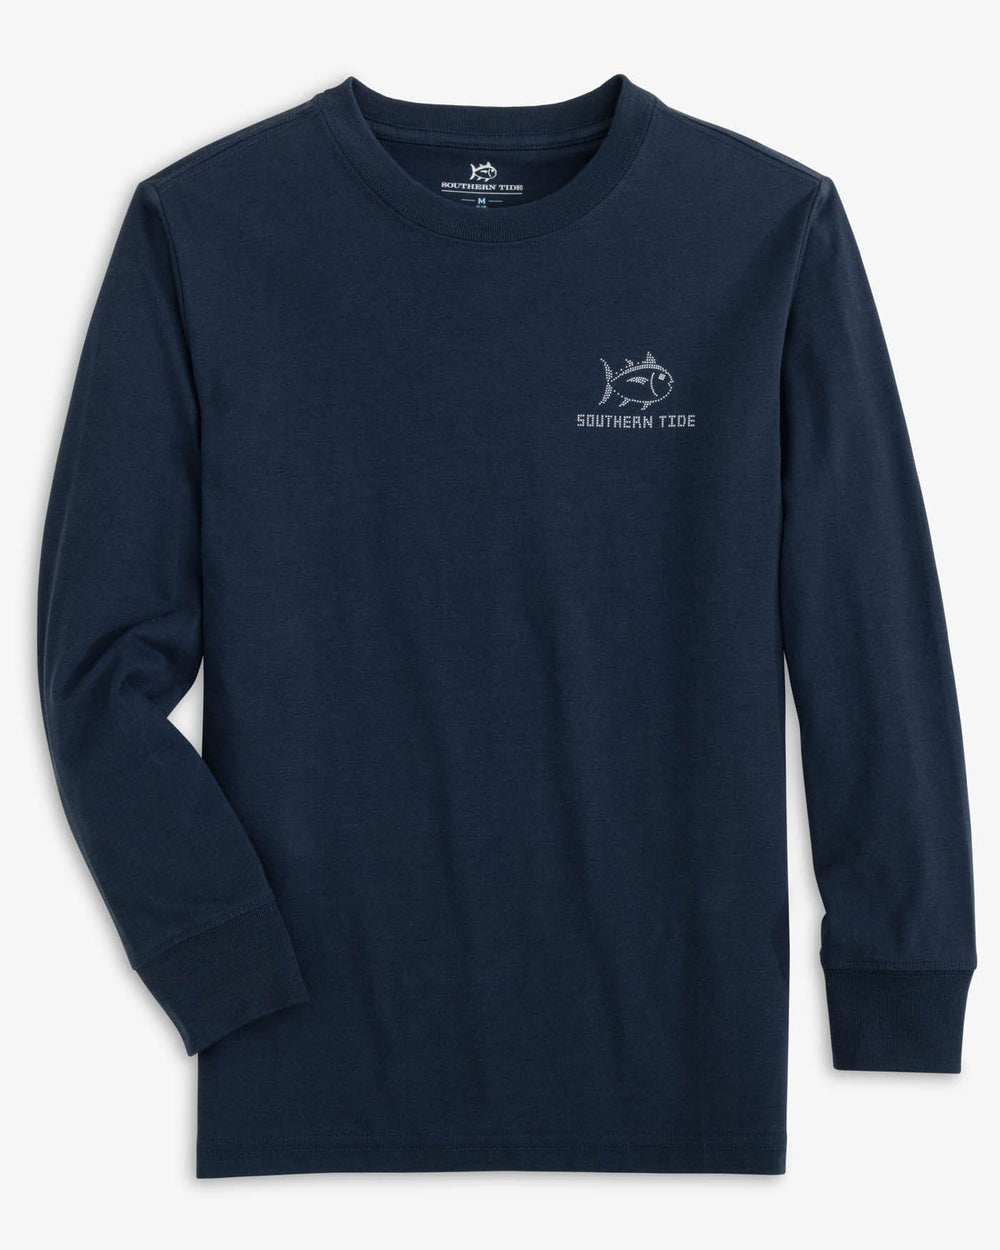 The front view of the Southern Tide Youth Fair Isle Skipjack Long Sleeve T-shirt by Southern Tide - True Navy